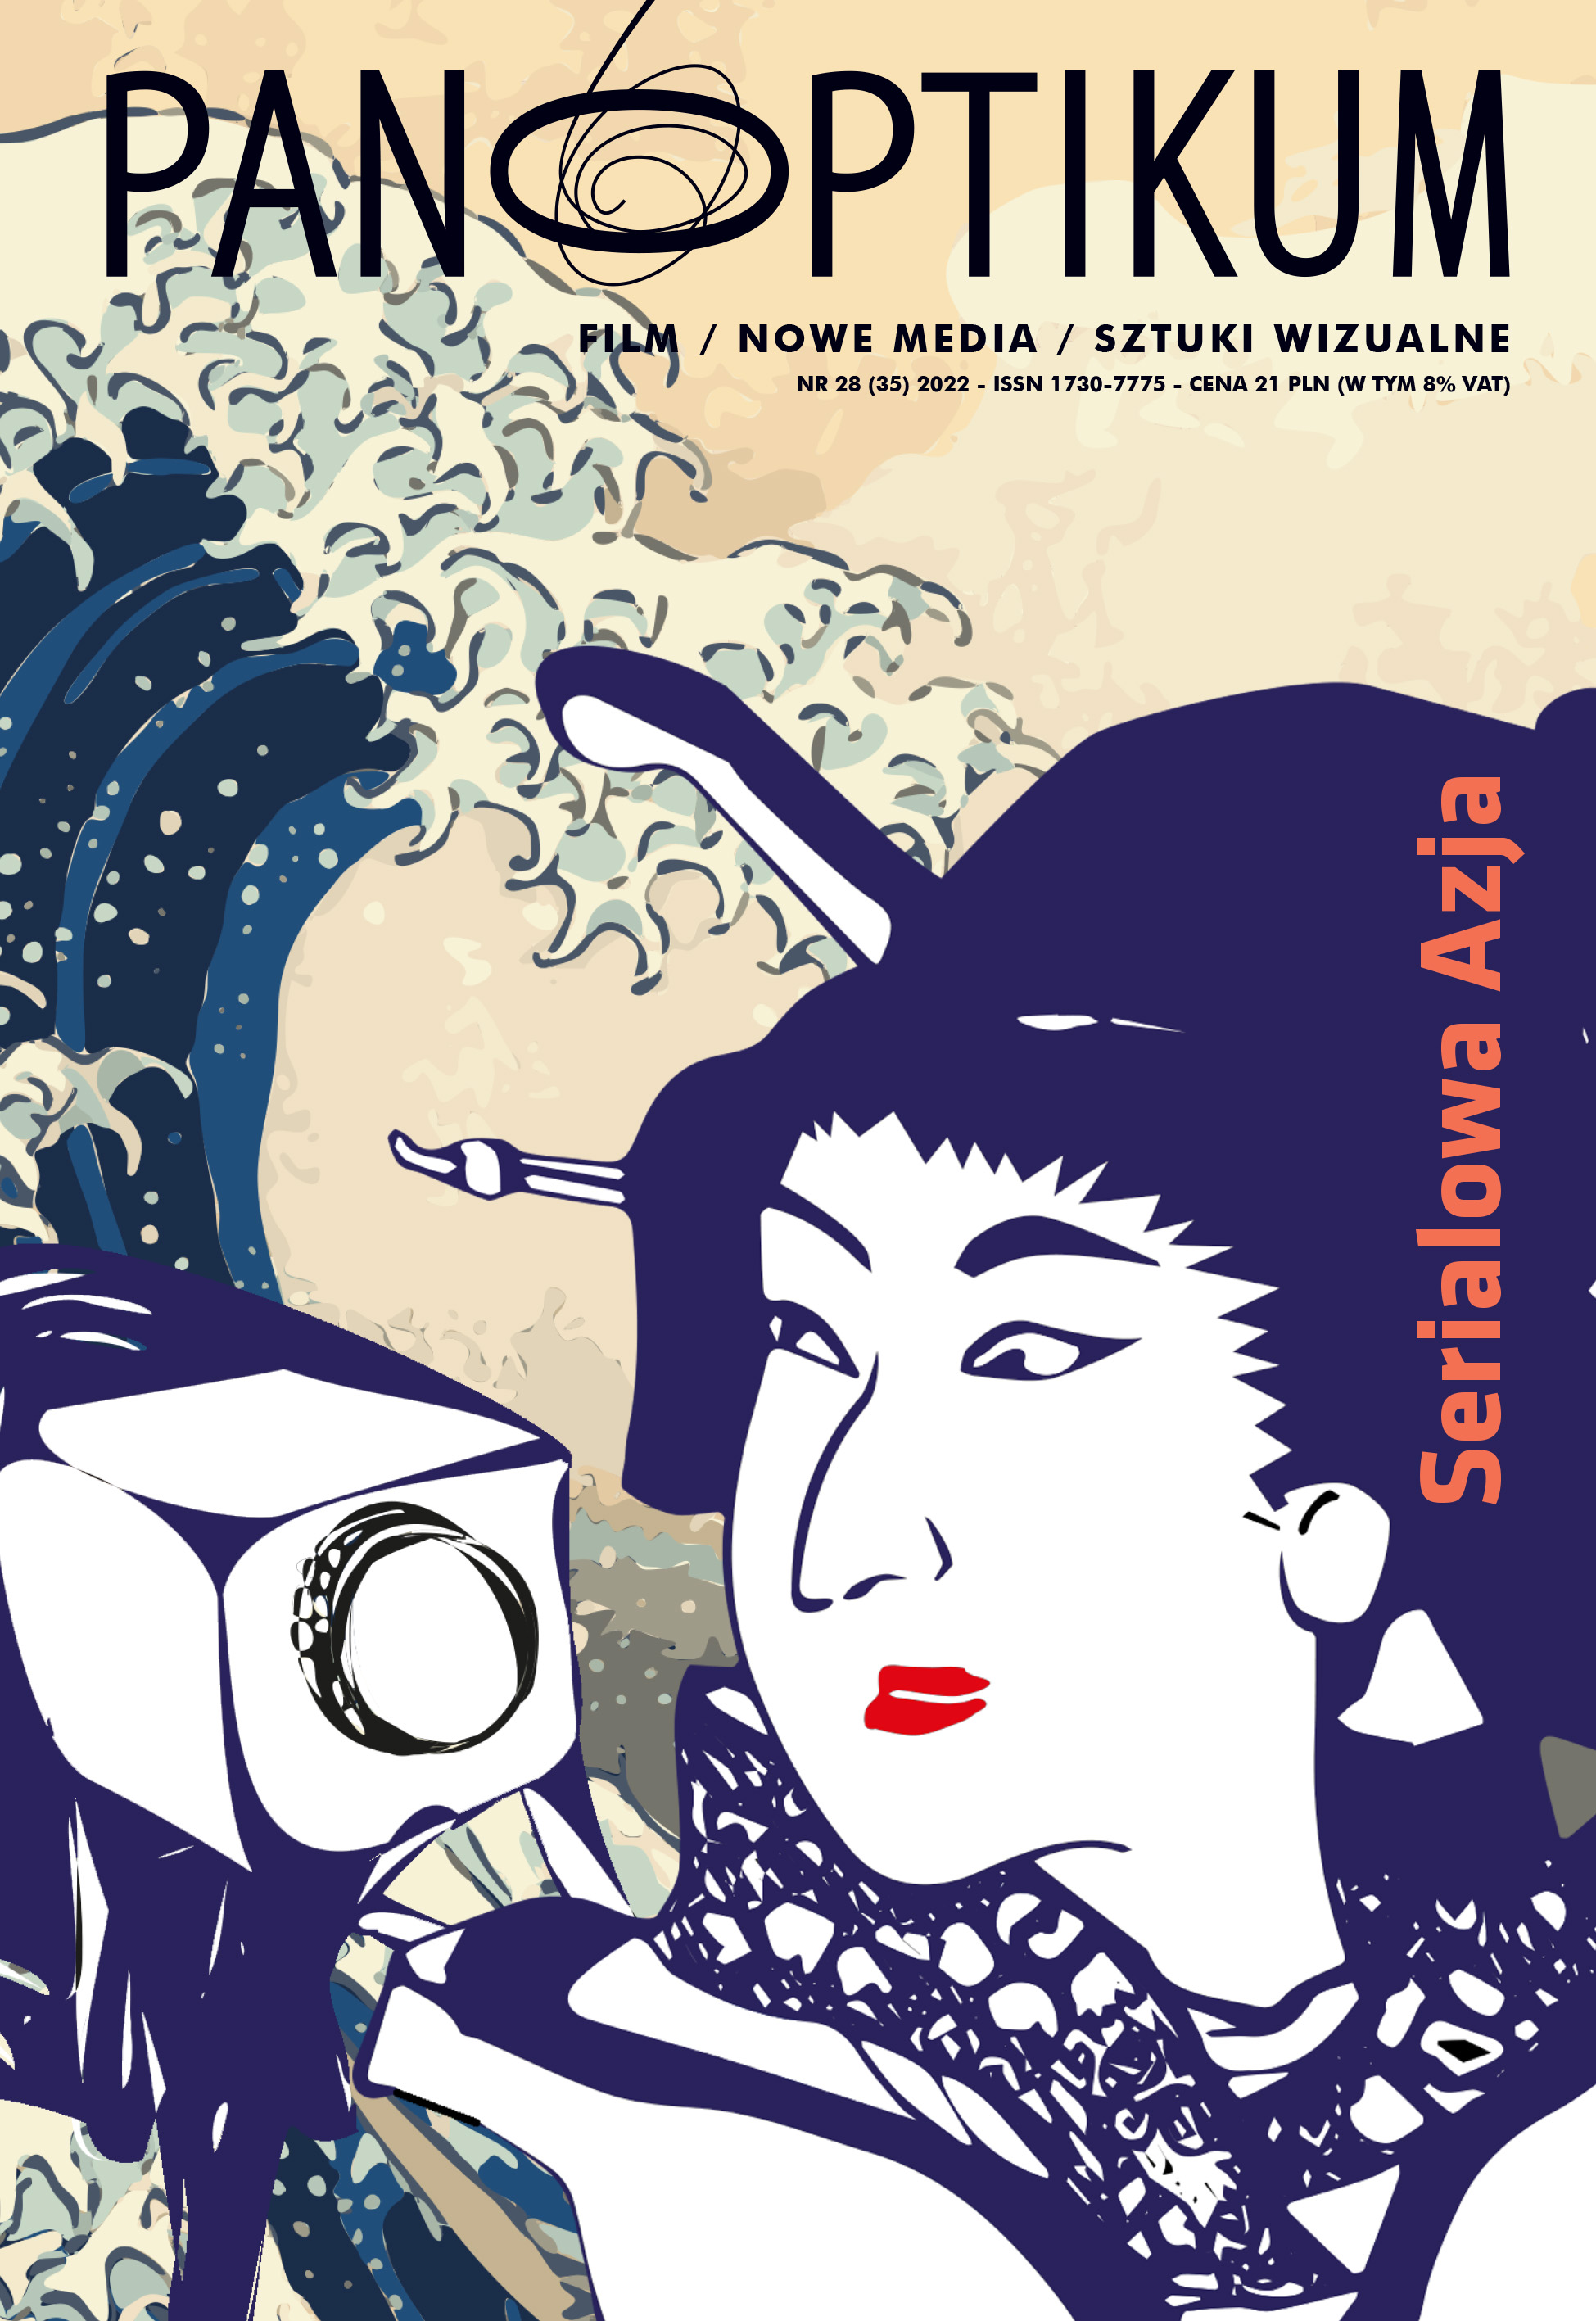 Untamed rhizome stories. Mo Dao Zu Shi and Chen Qing Ling as an example of transmediality in China Cover Image